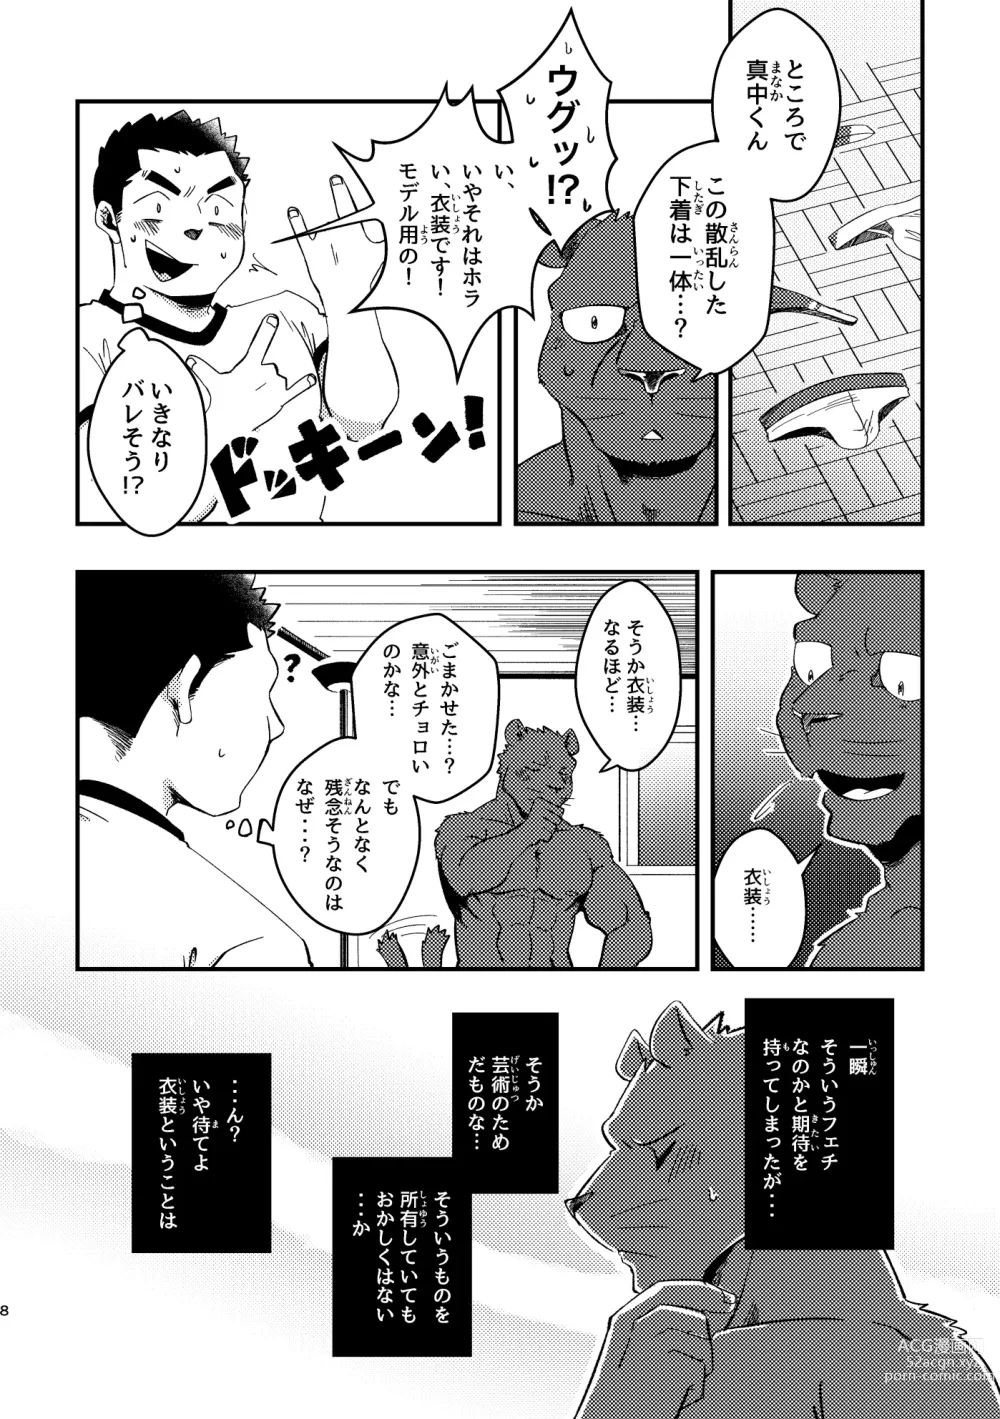 Page 8 of doujinshi Youkoso! Chimi Mouryou Dormitory -Volume 1-